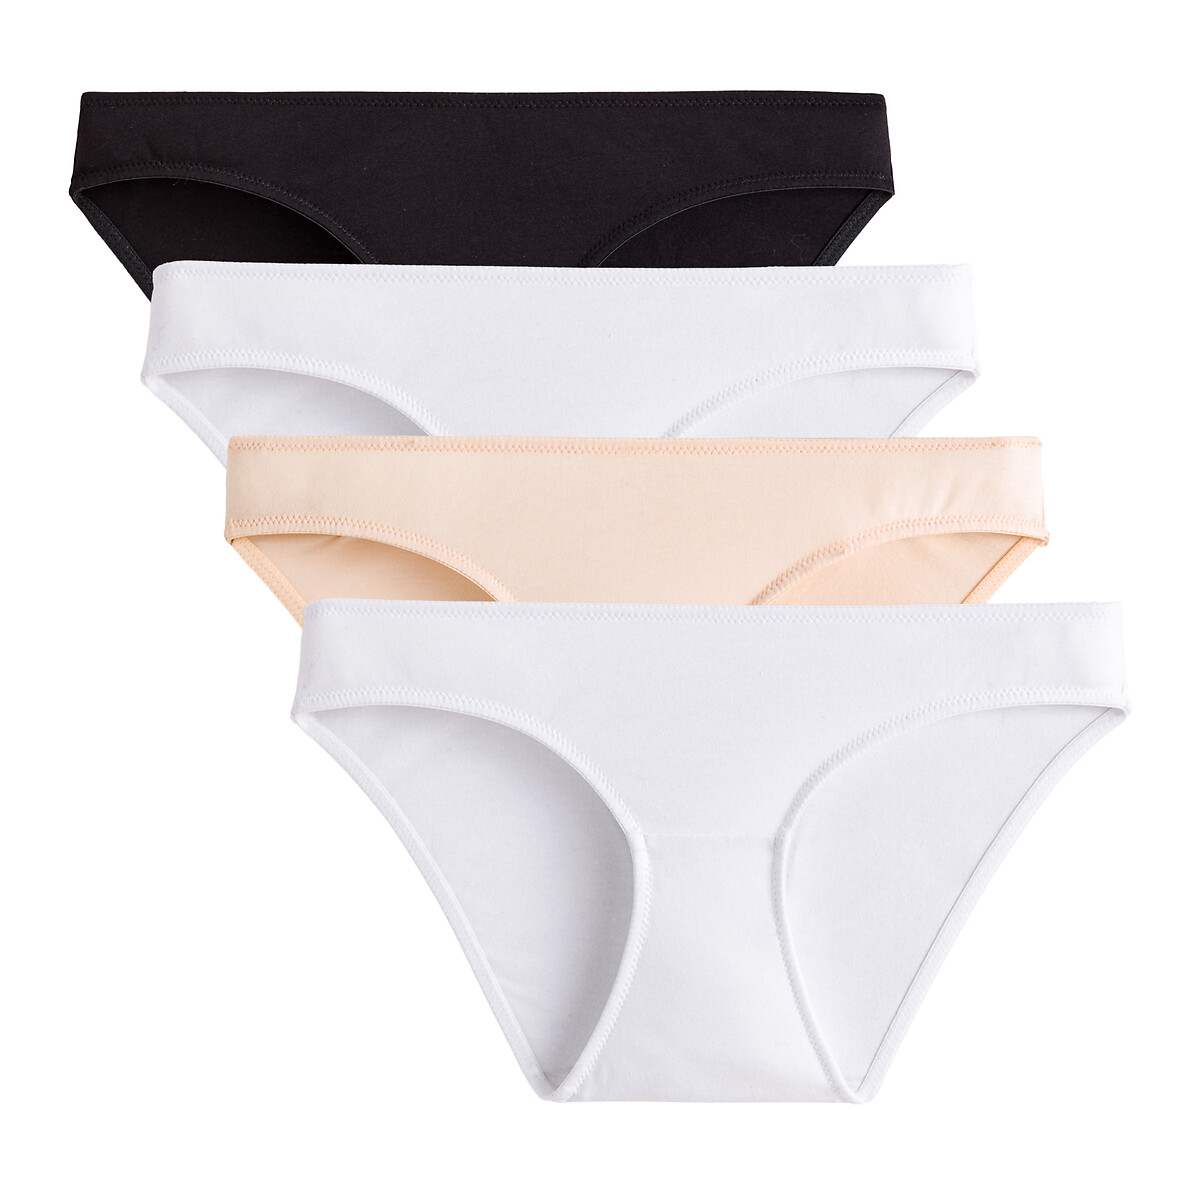 Pack of 4 Maternity Knickers in Cotton